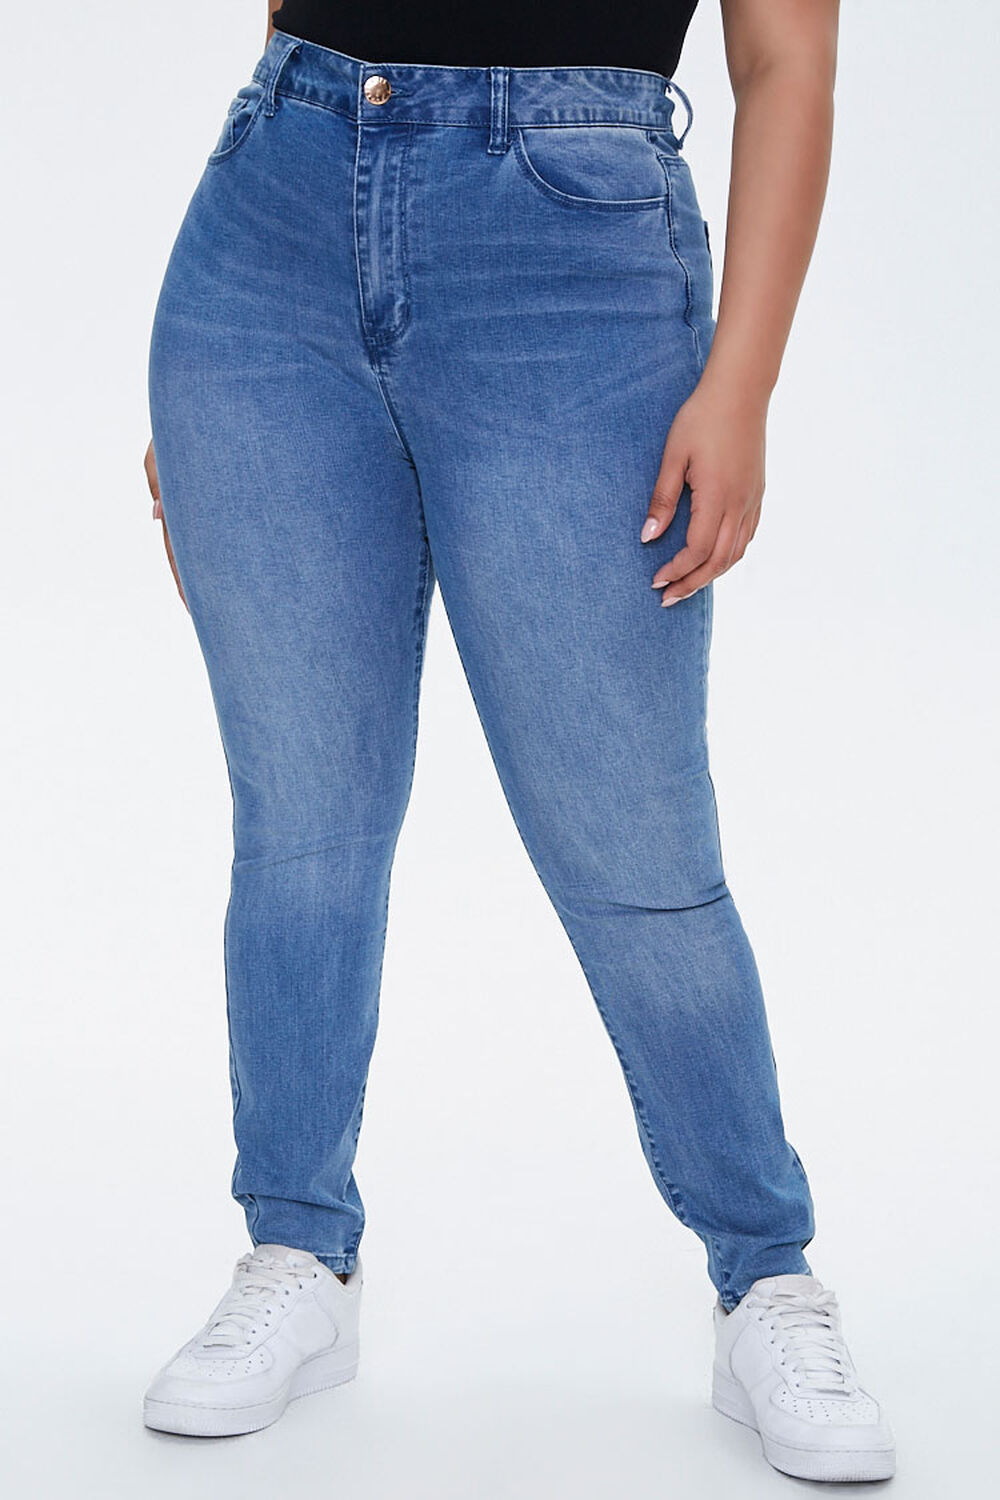 Plus Size High-Rise Skinny Jeans, image 2